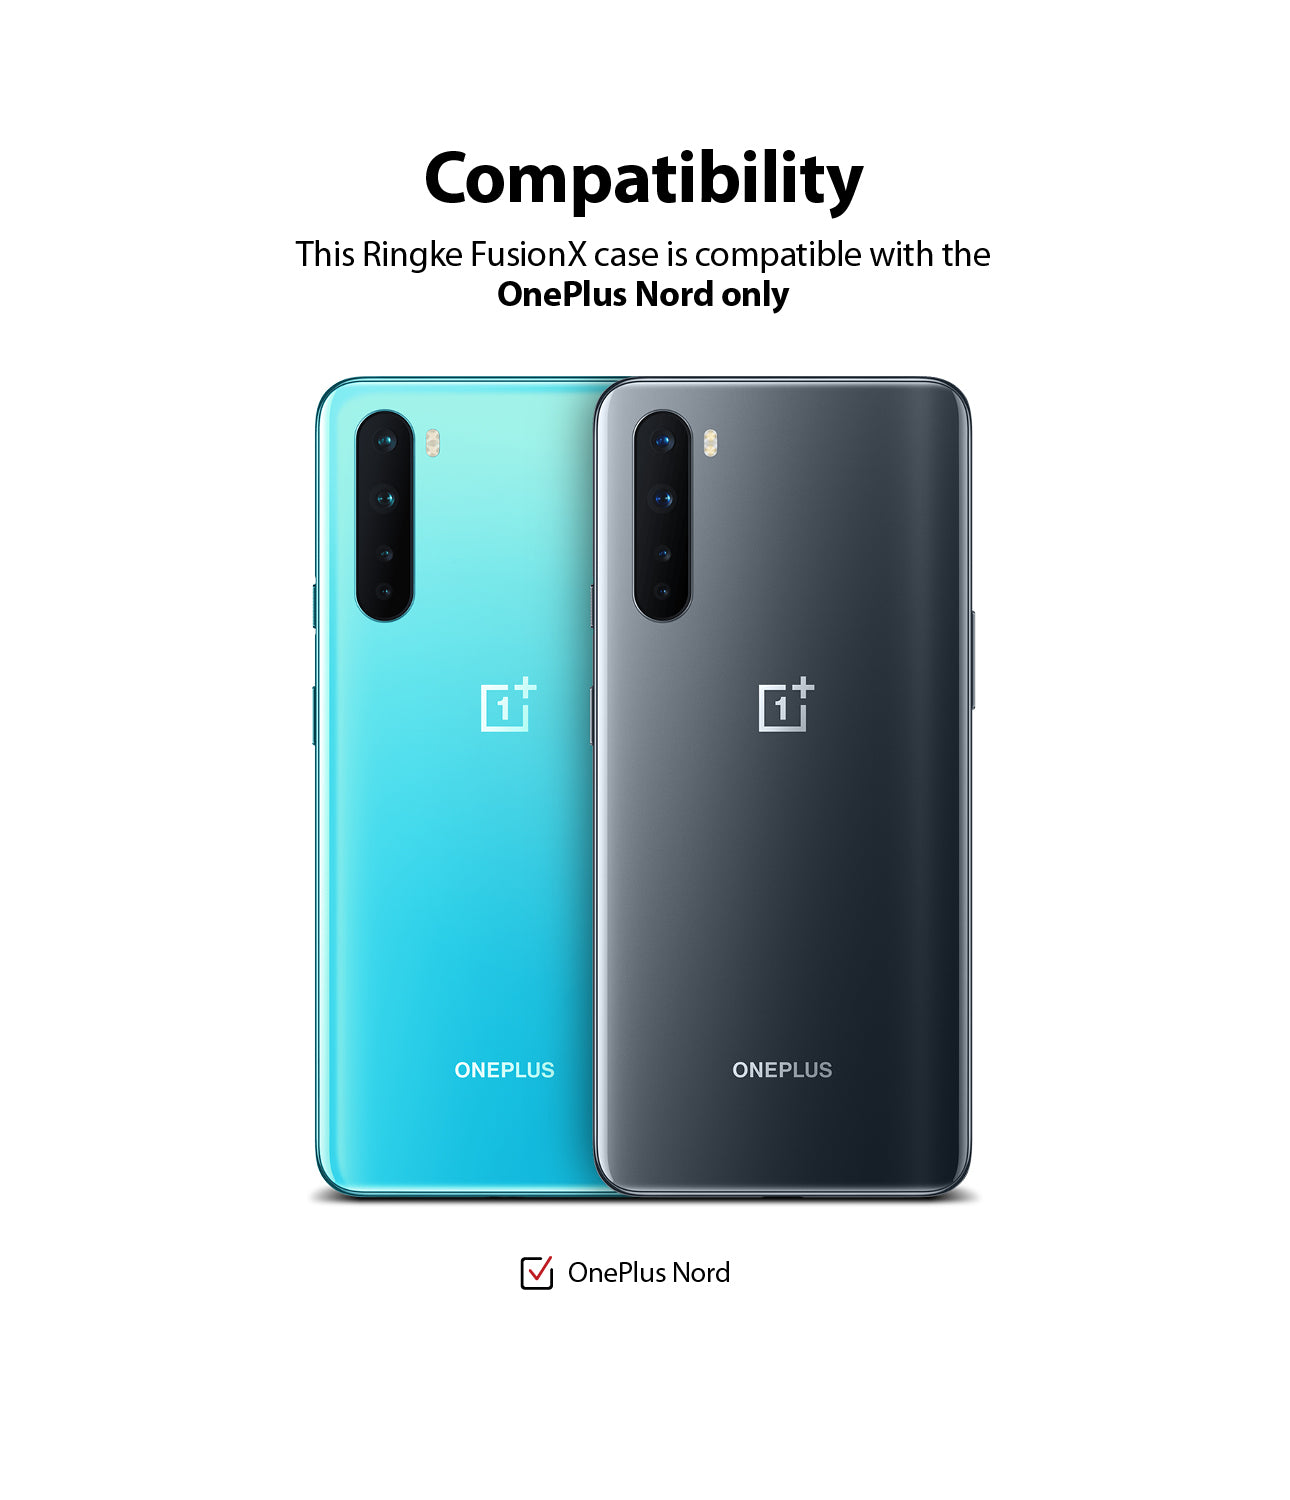 compatible with only oneplus nord